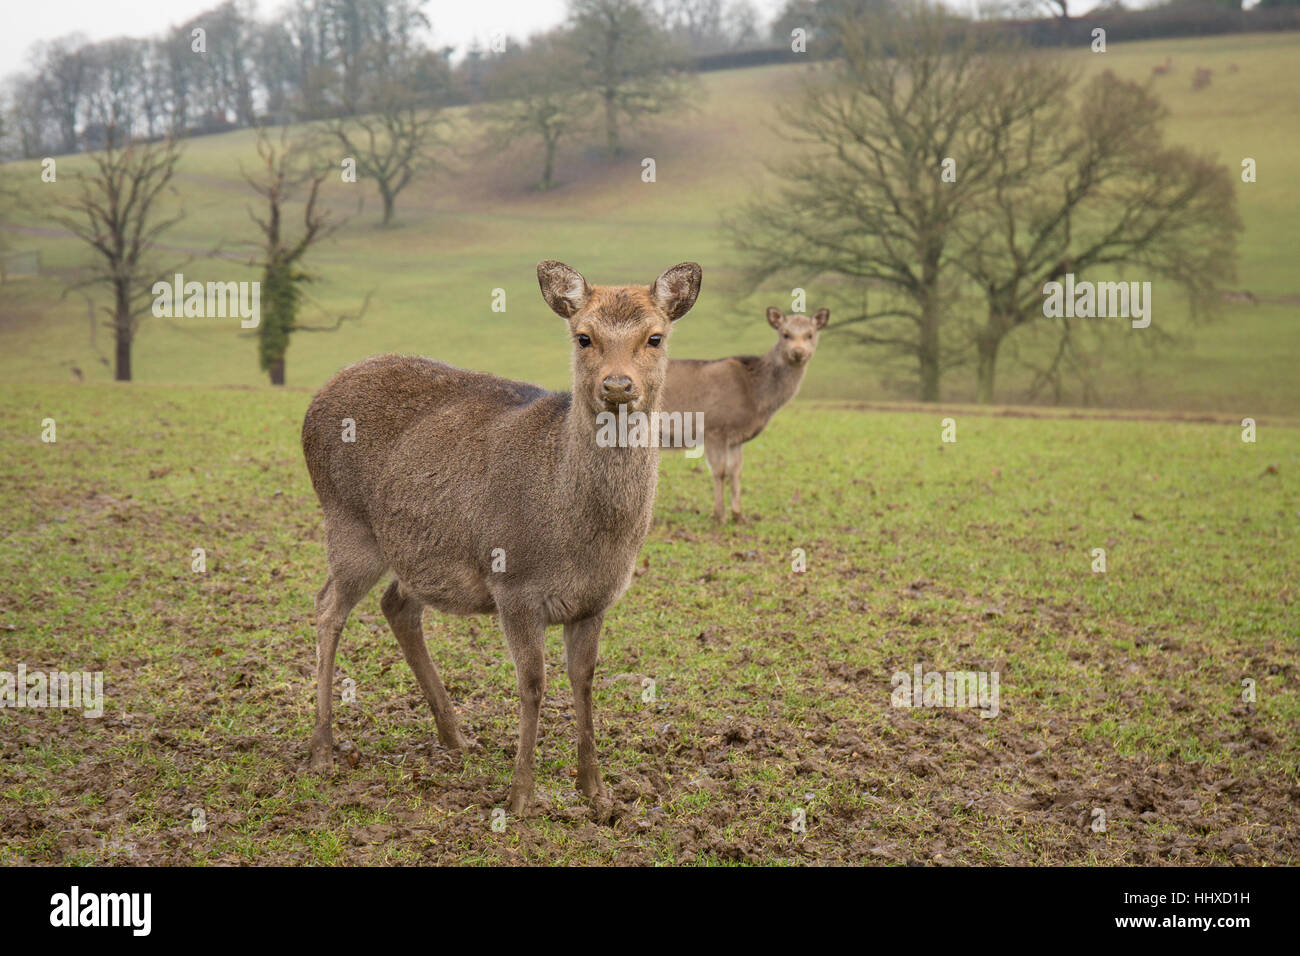 2 small deer standing in a grassy field Stock Photo